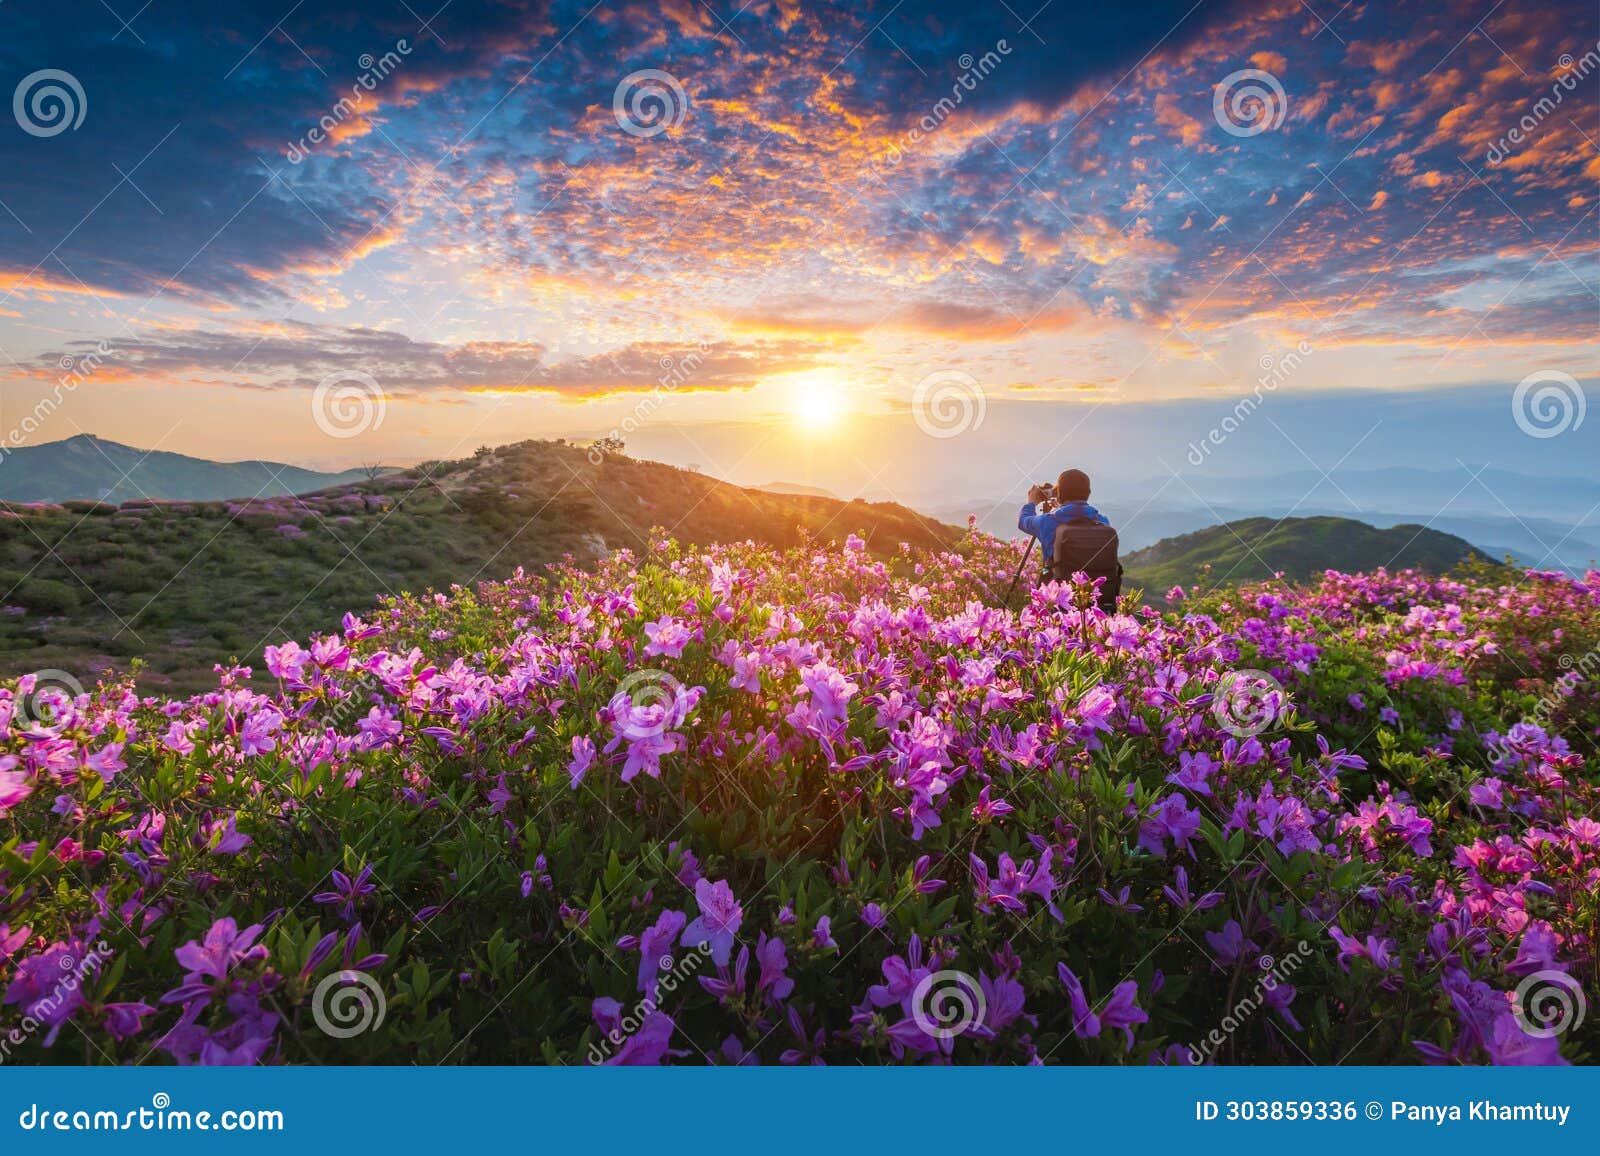 a man is taking the pictures of the first light in morning and spring view of pink azalea flowers at hwangmaesan mountain with the